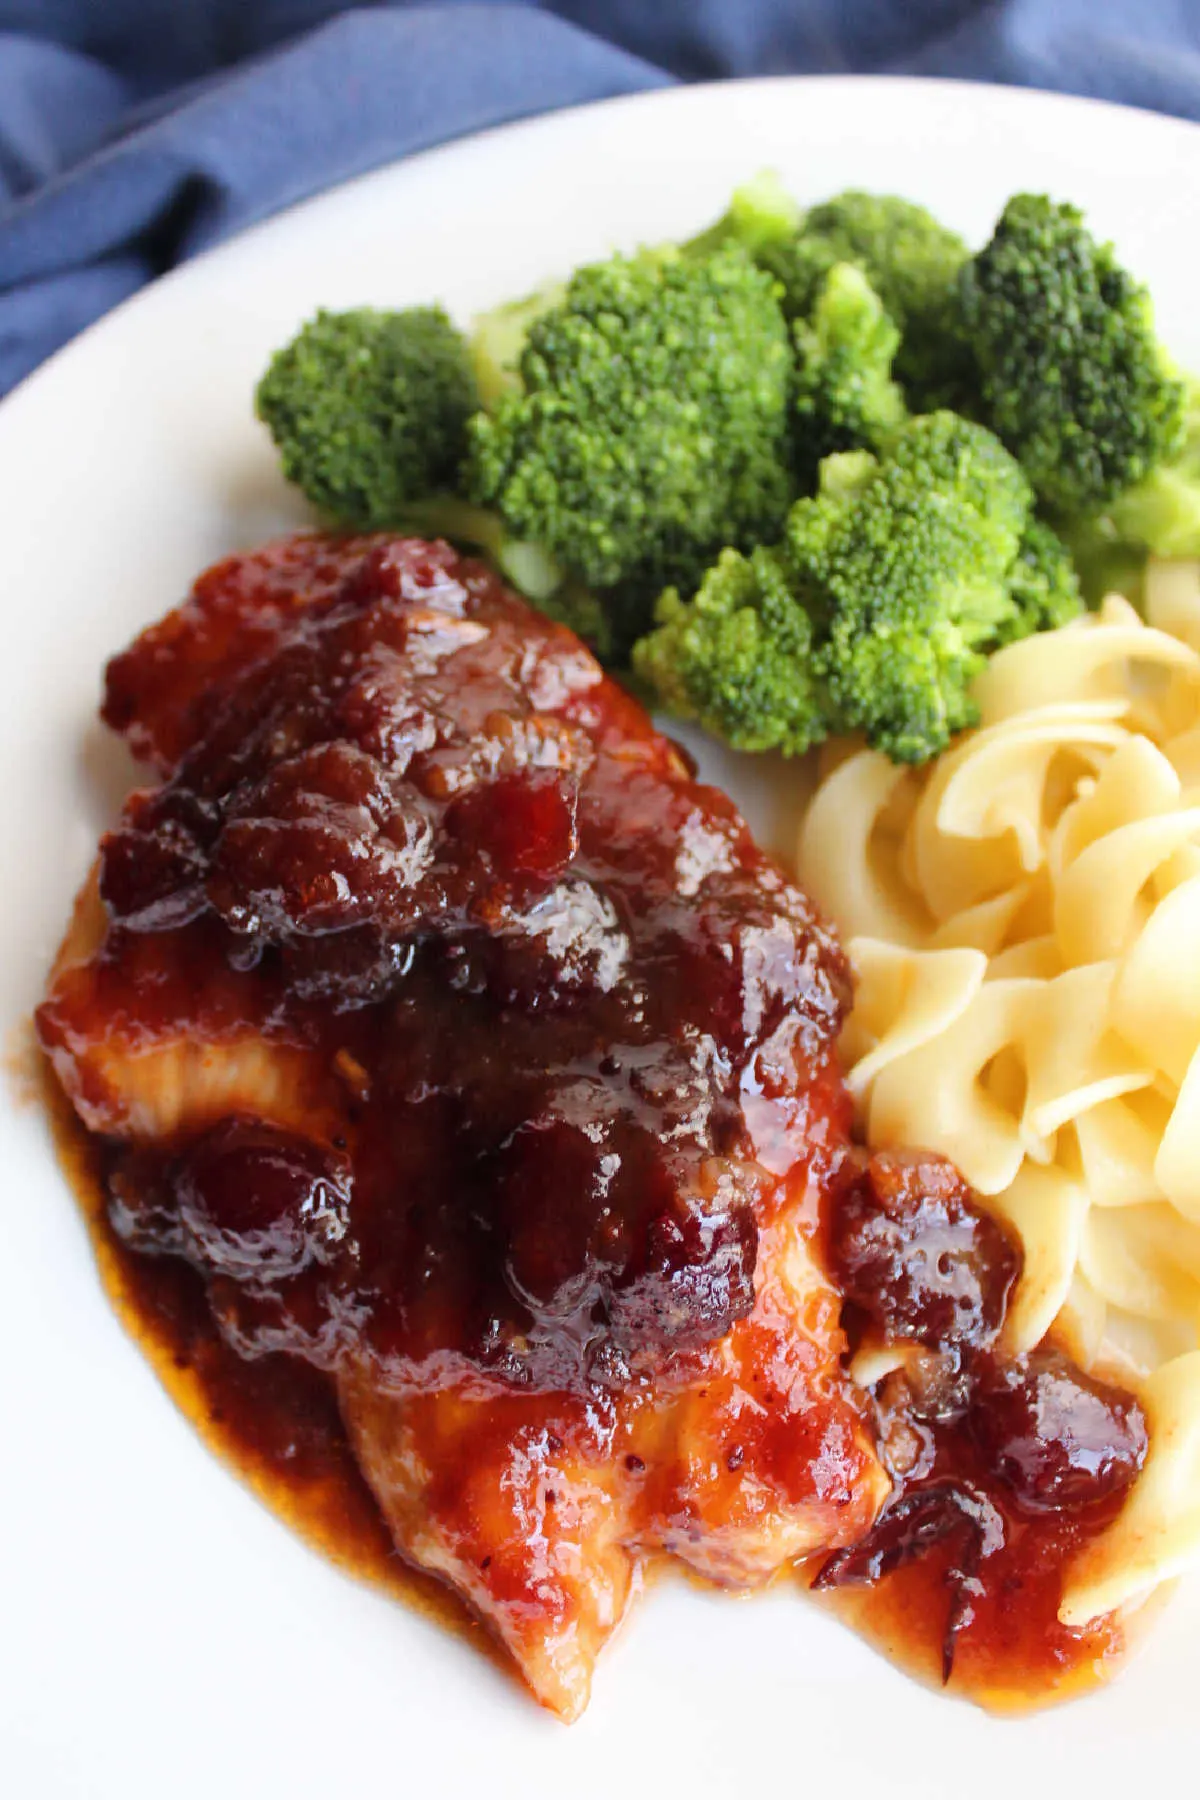 Cranberry chicken breast served with egg noodles and steamed broccoli.